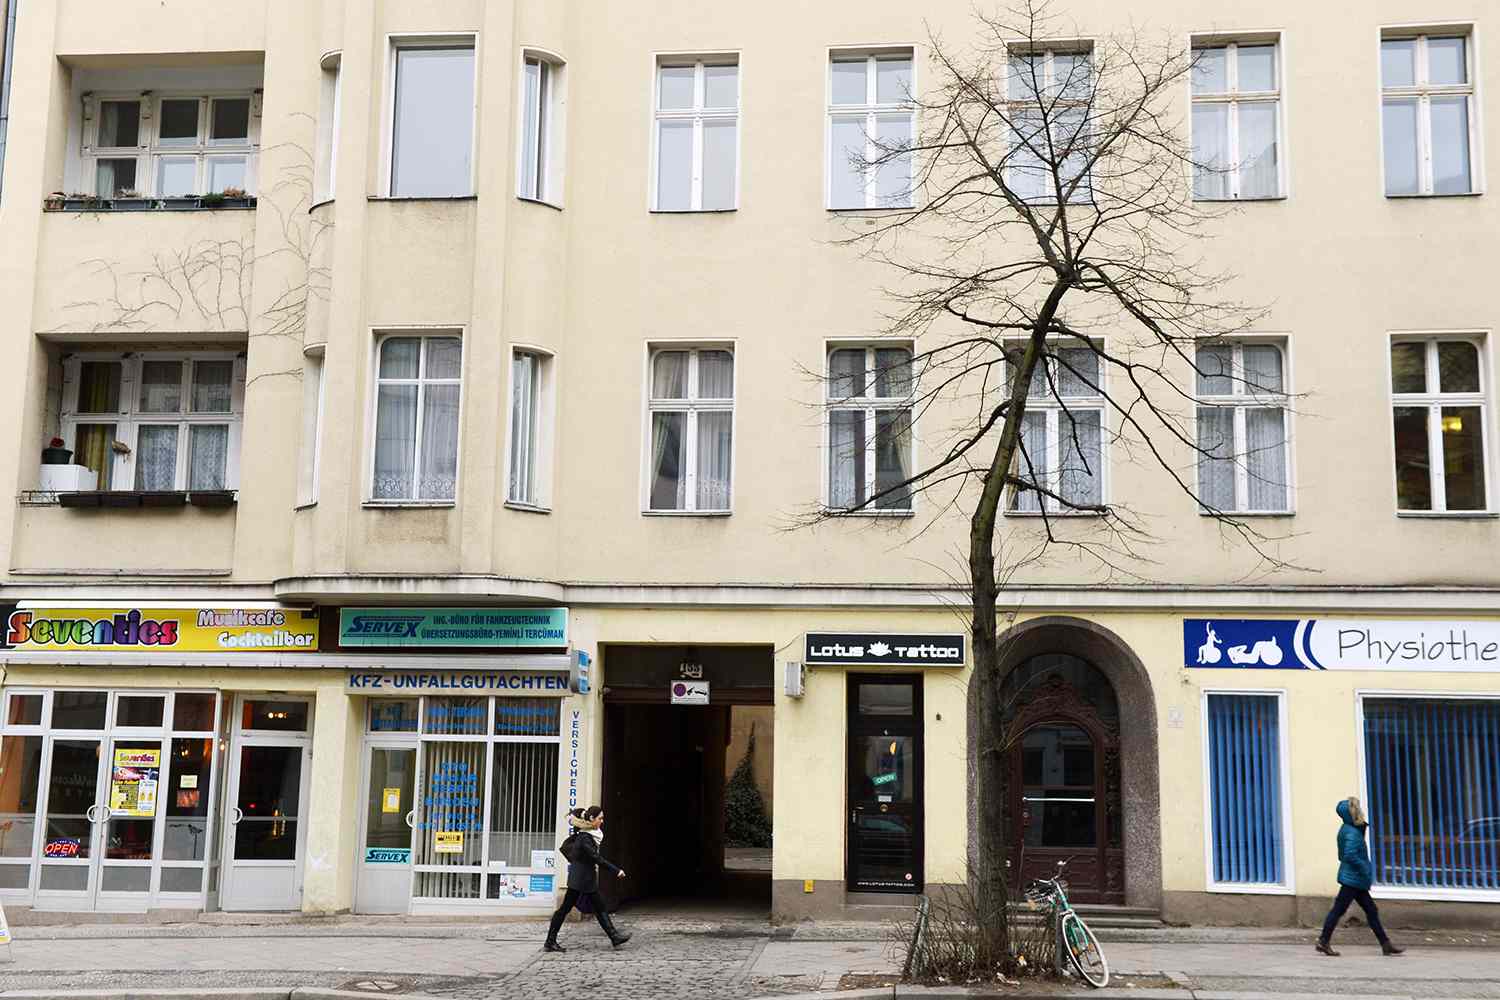 View of of the house at 155 Hauptstrasse, where David Bowie resided during his stay, in Berlin, Germany, 14 February 2013